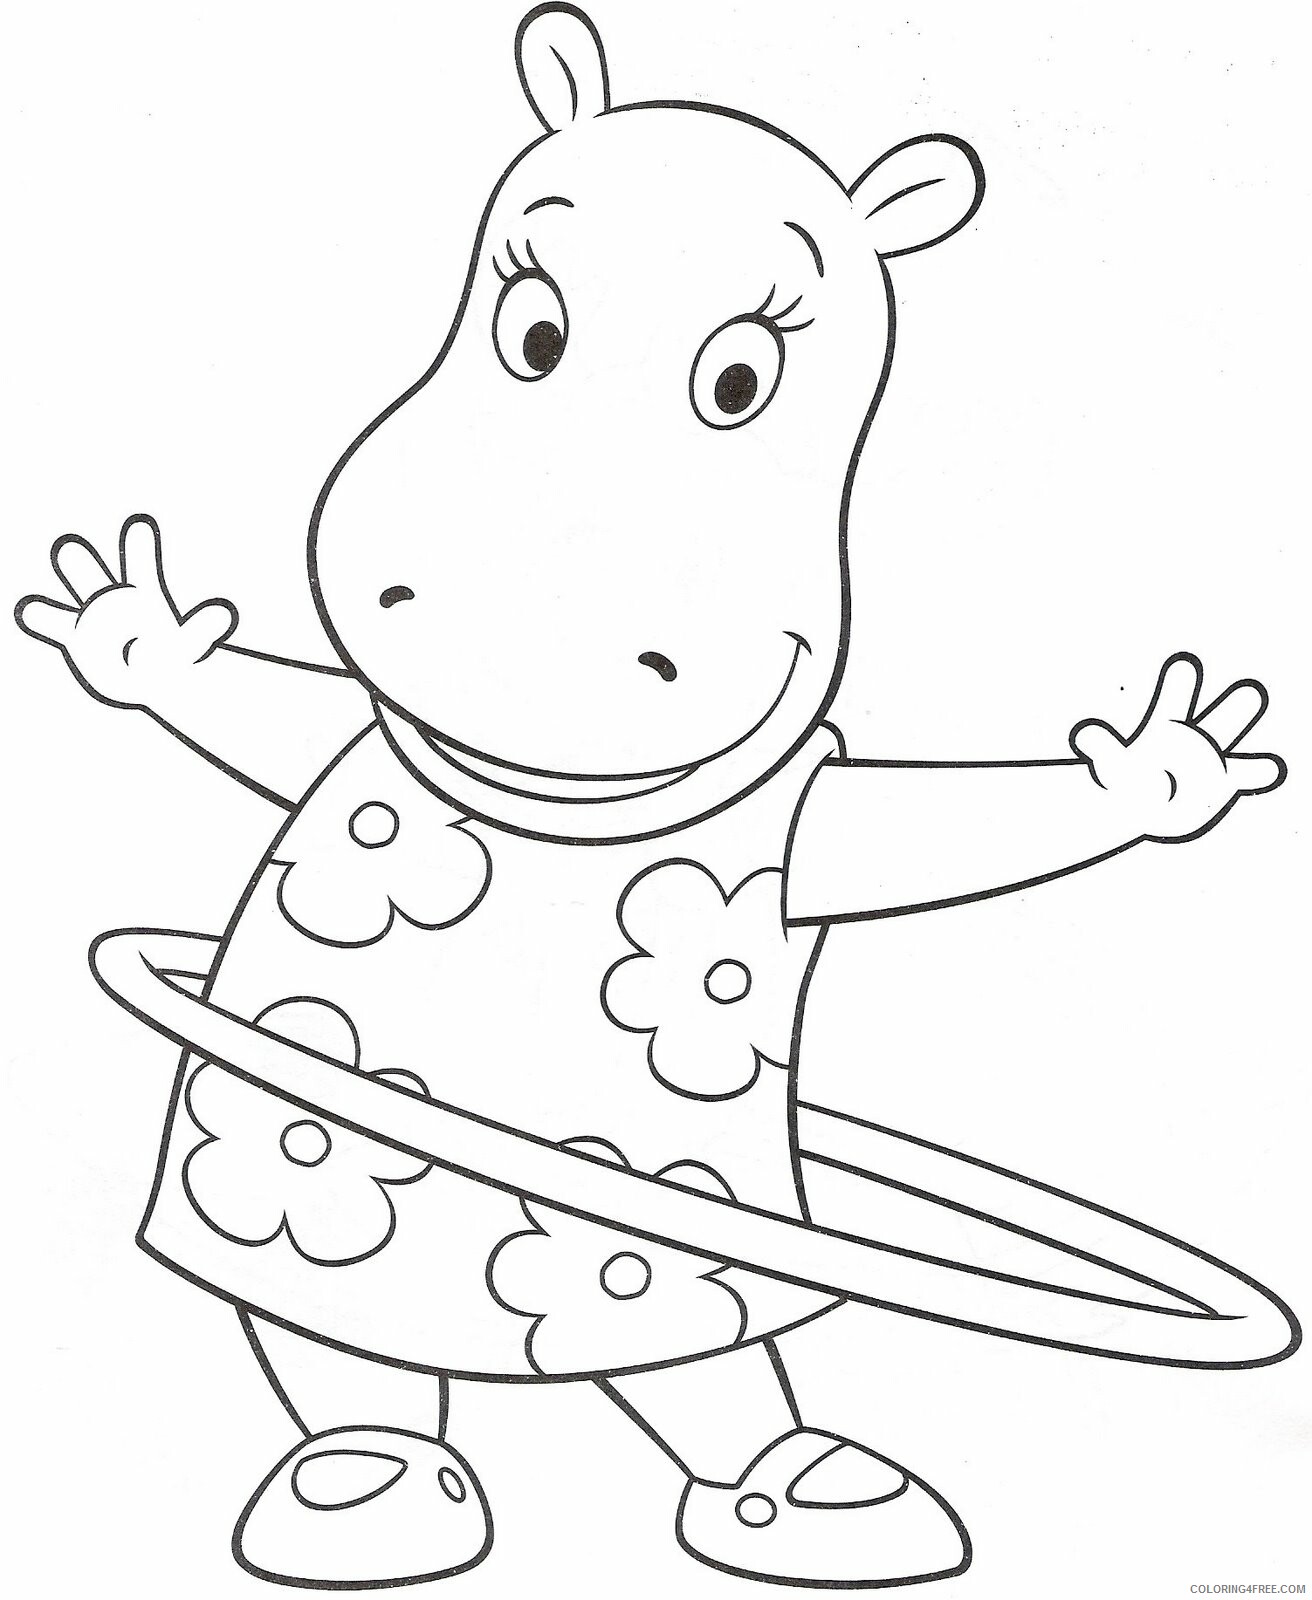 Backyardigans Coloring Pages TV Film Backyardigan Pictures Printable 2020 00495 Coloring4free